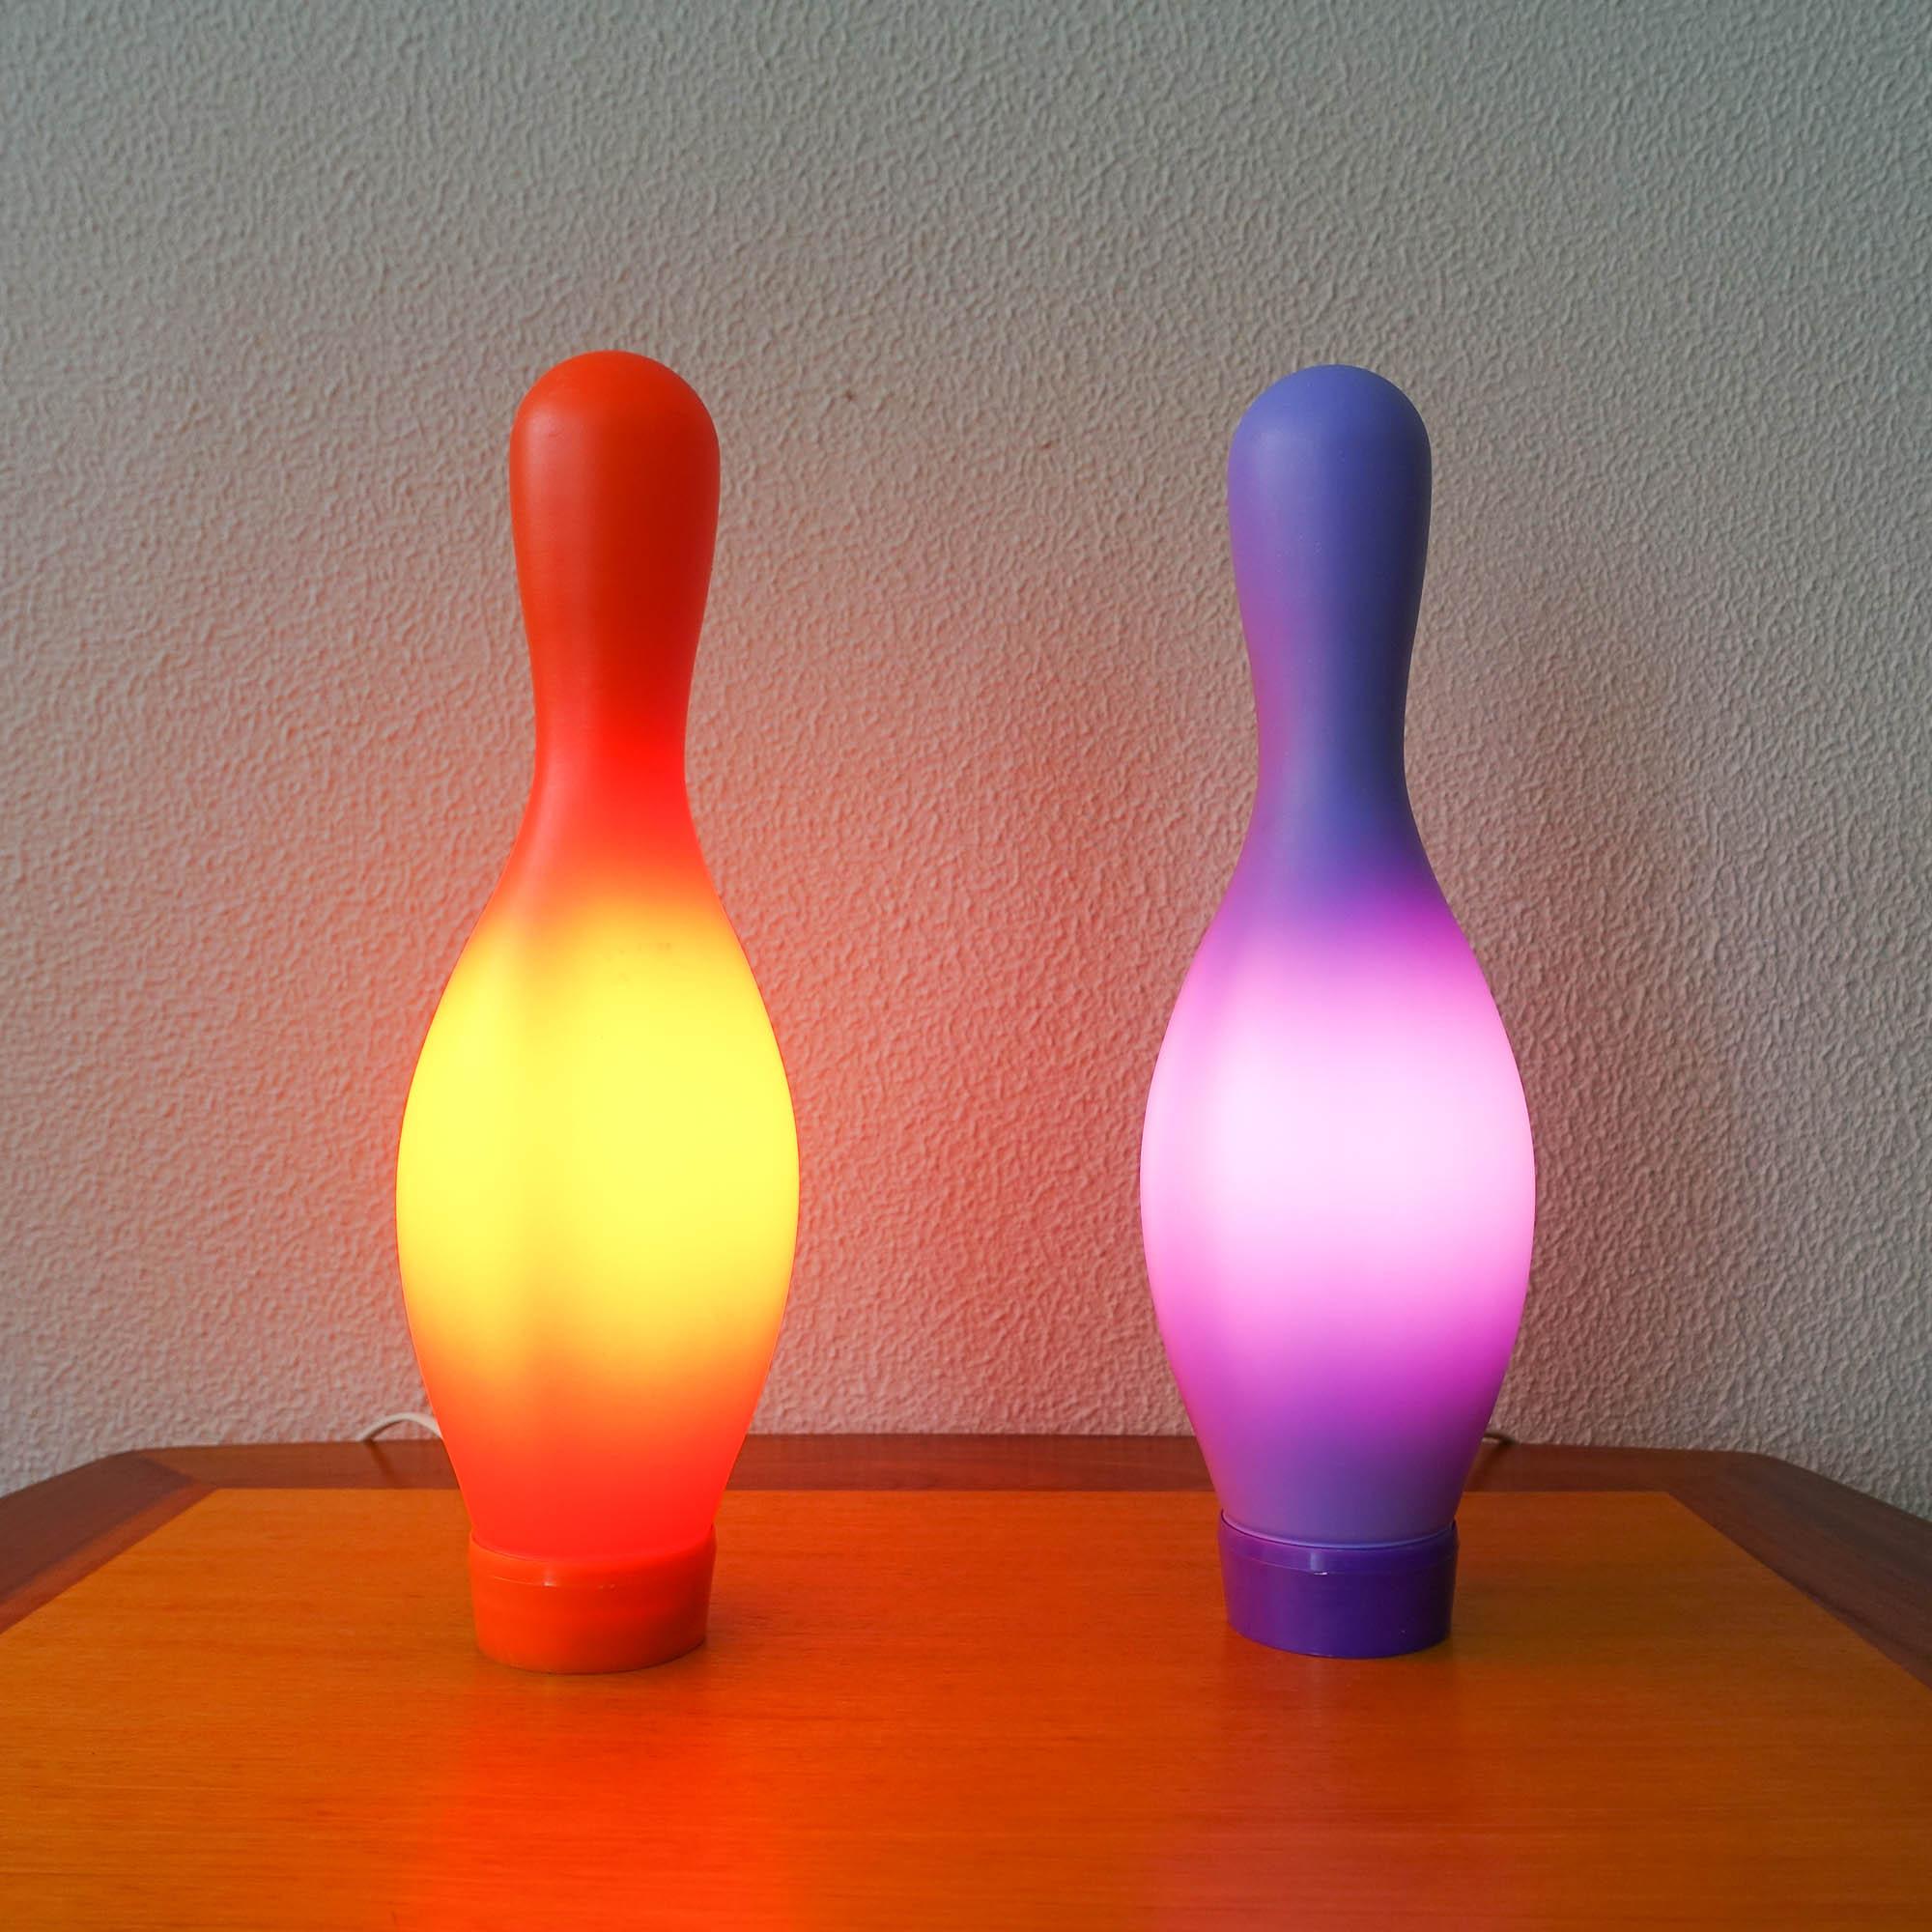 American Pair of Knock-Off Table Lamp by Josh Owen for Bozart, 2002 For Sale